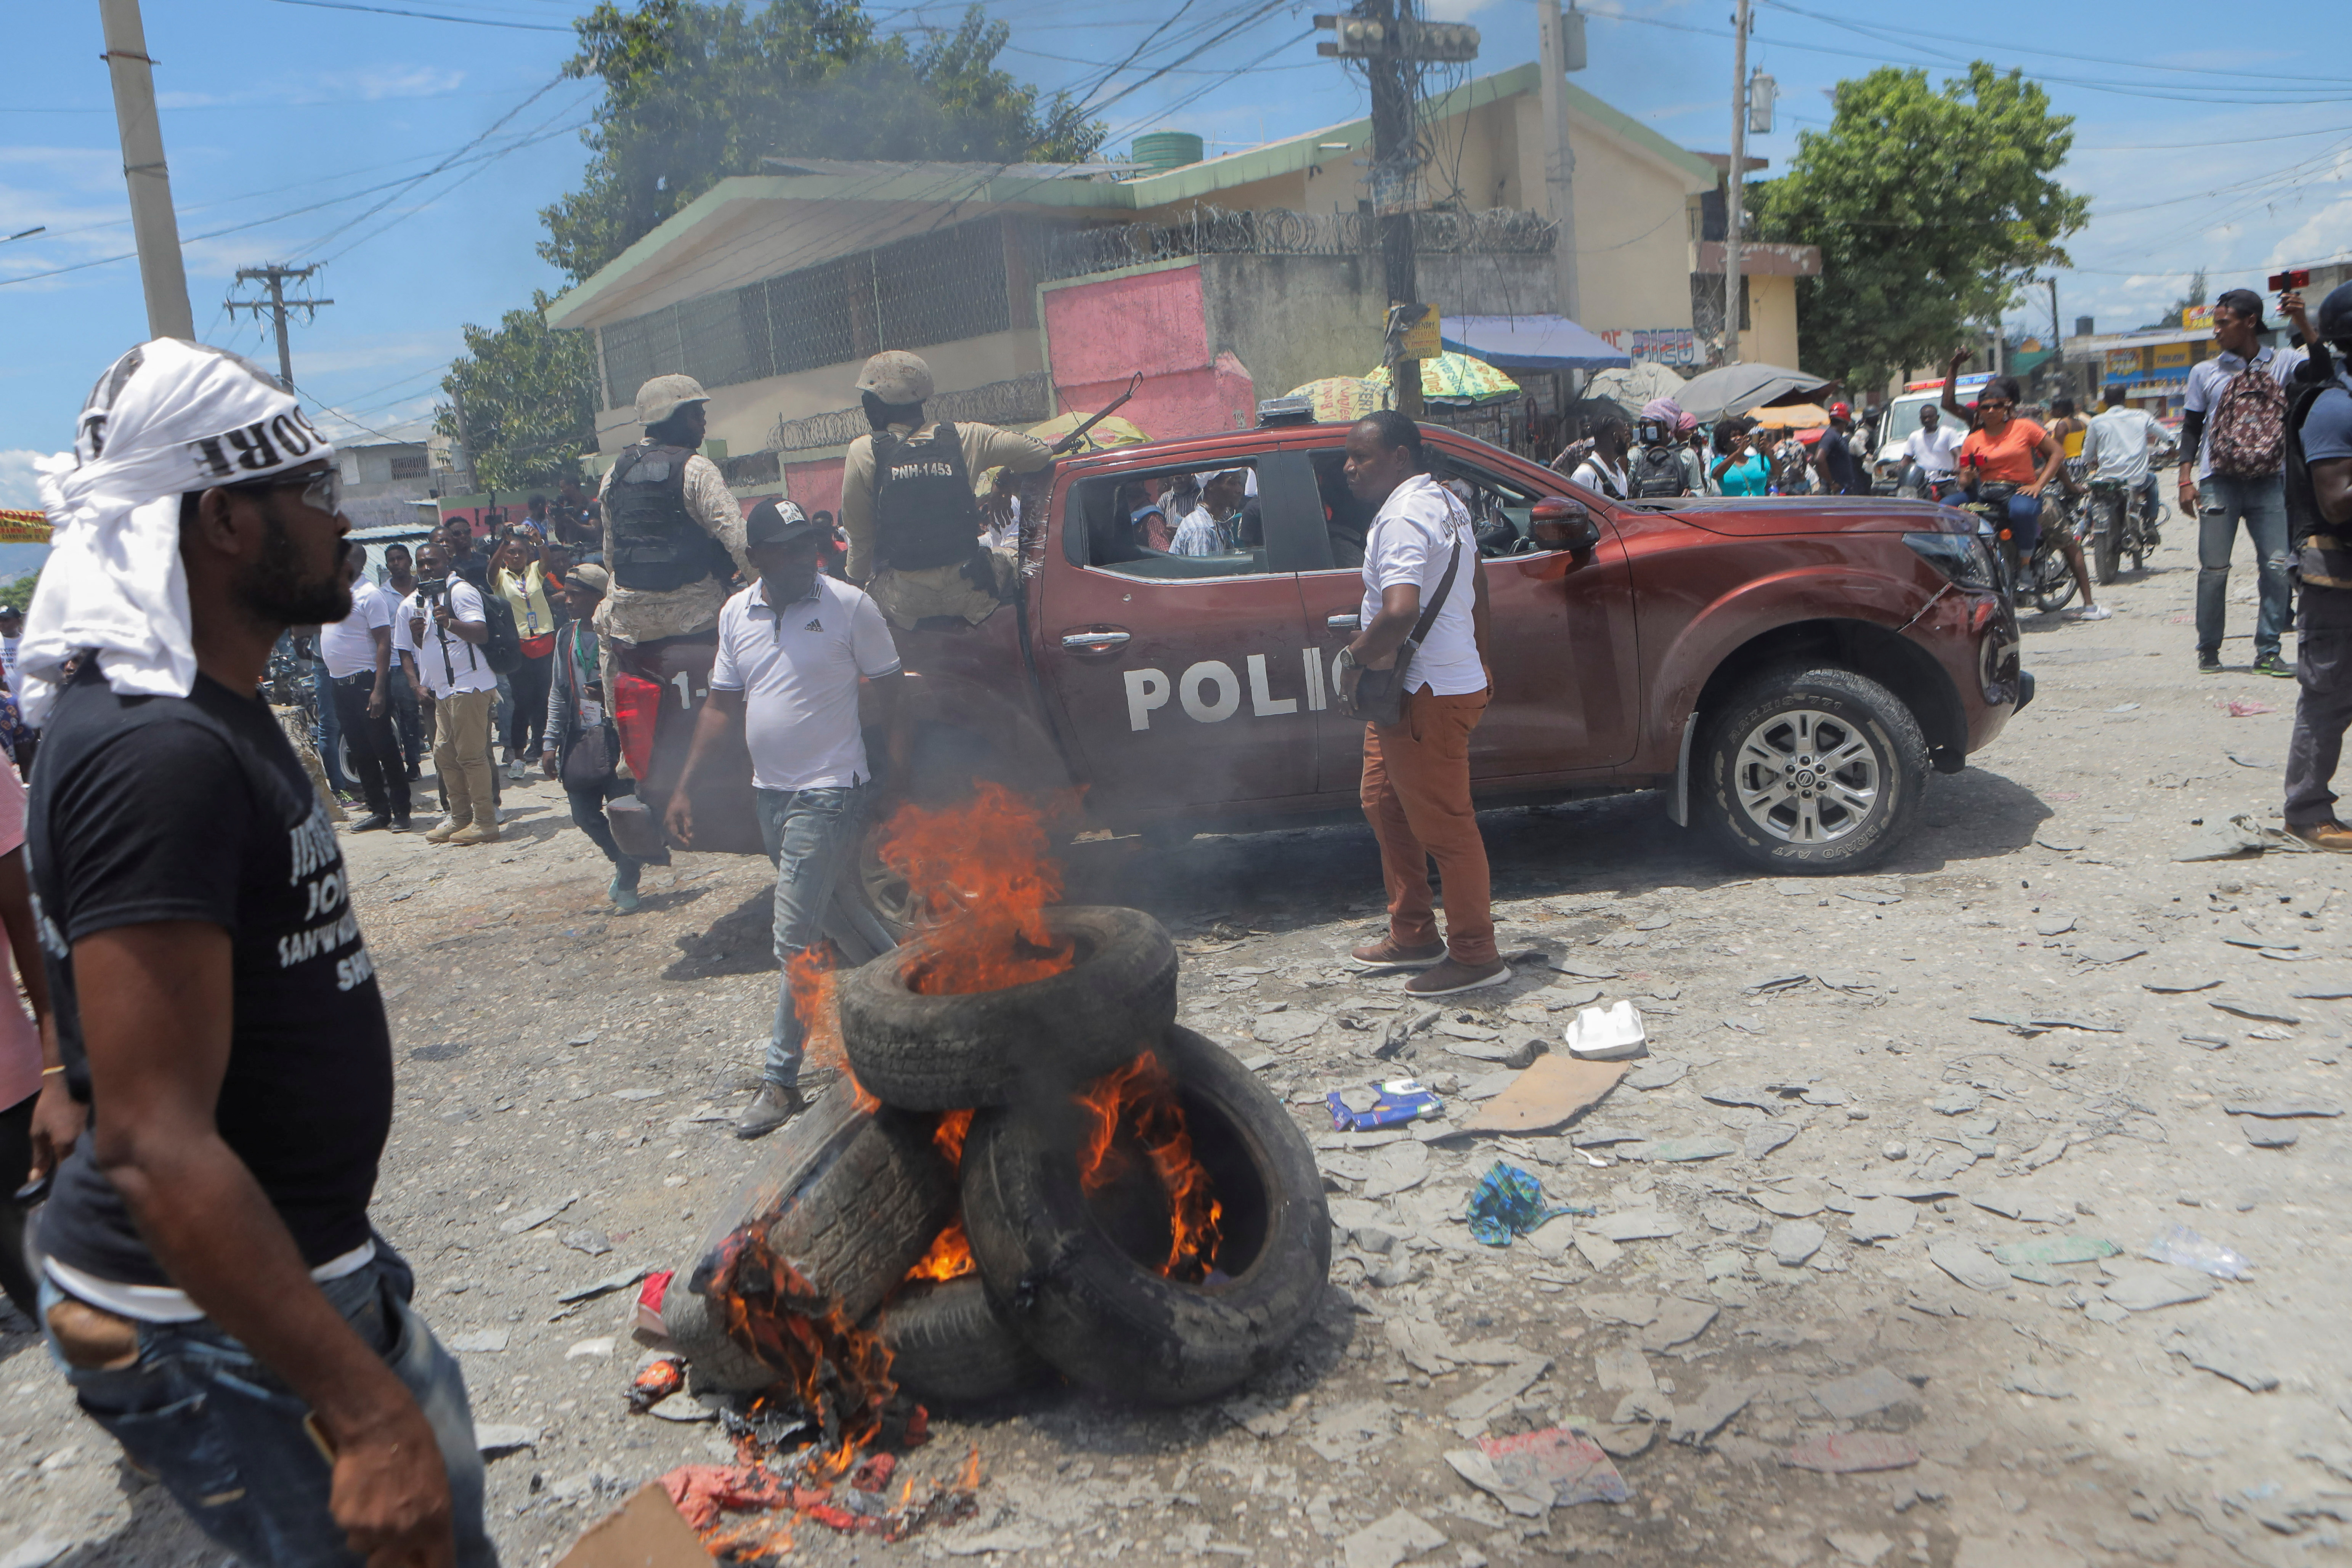 Police officers and protesters gather around a burning road block during a protest to demand justice for President Jovenel Moise one year after his assassination, in Port-au-Prince, Haiti, July 7, 2022. REUTERS/Ralph Tedy Erol